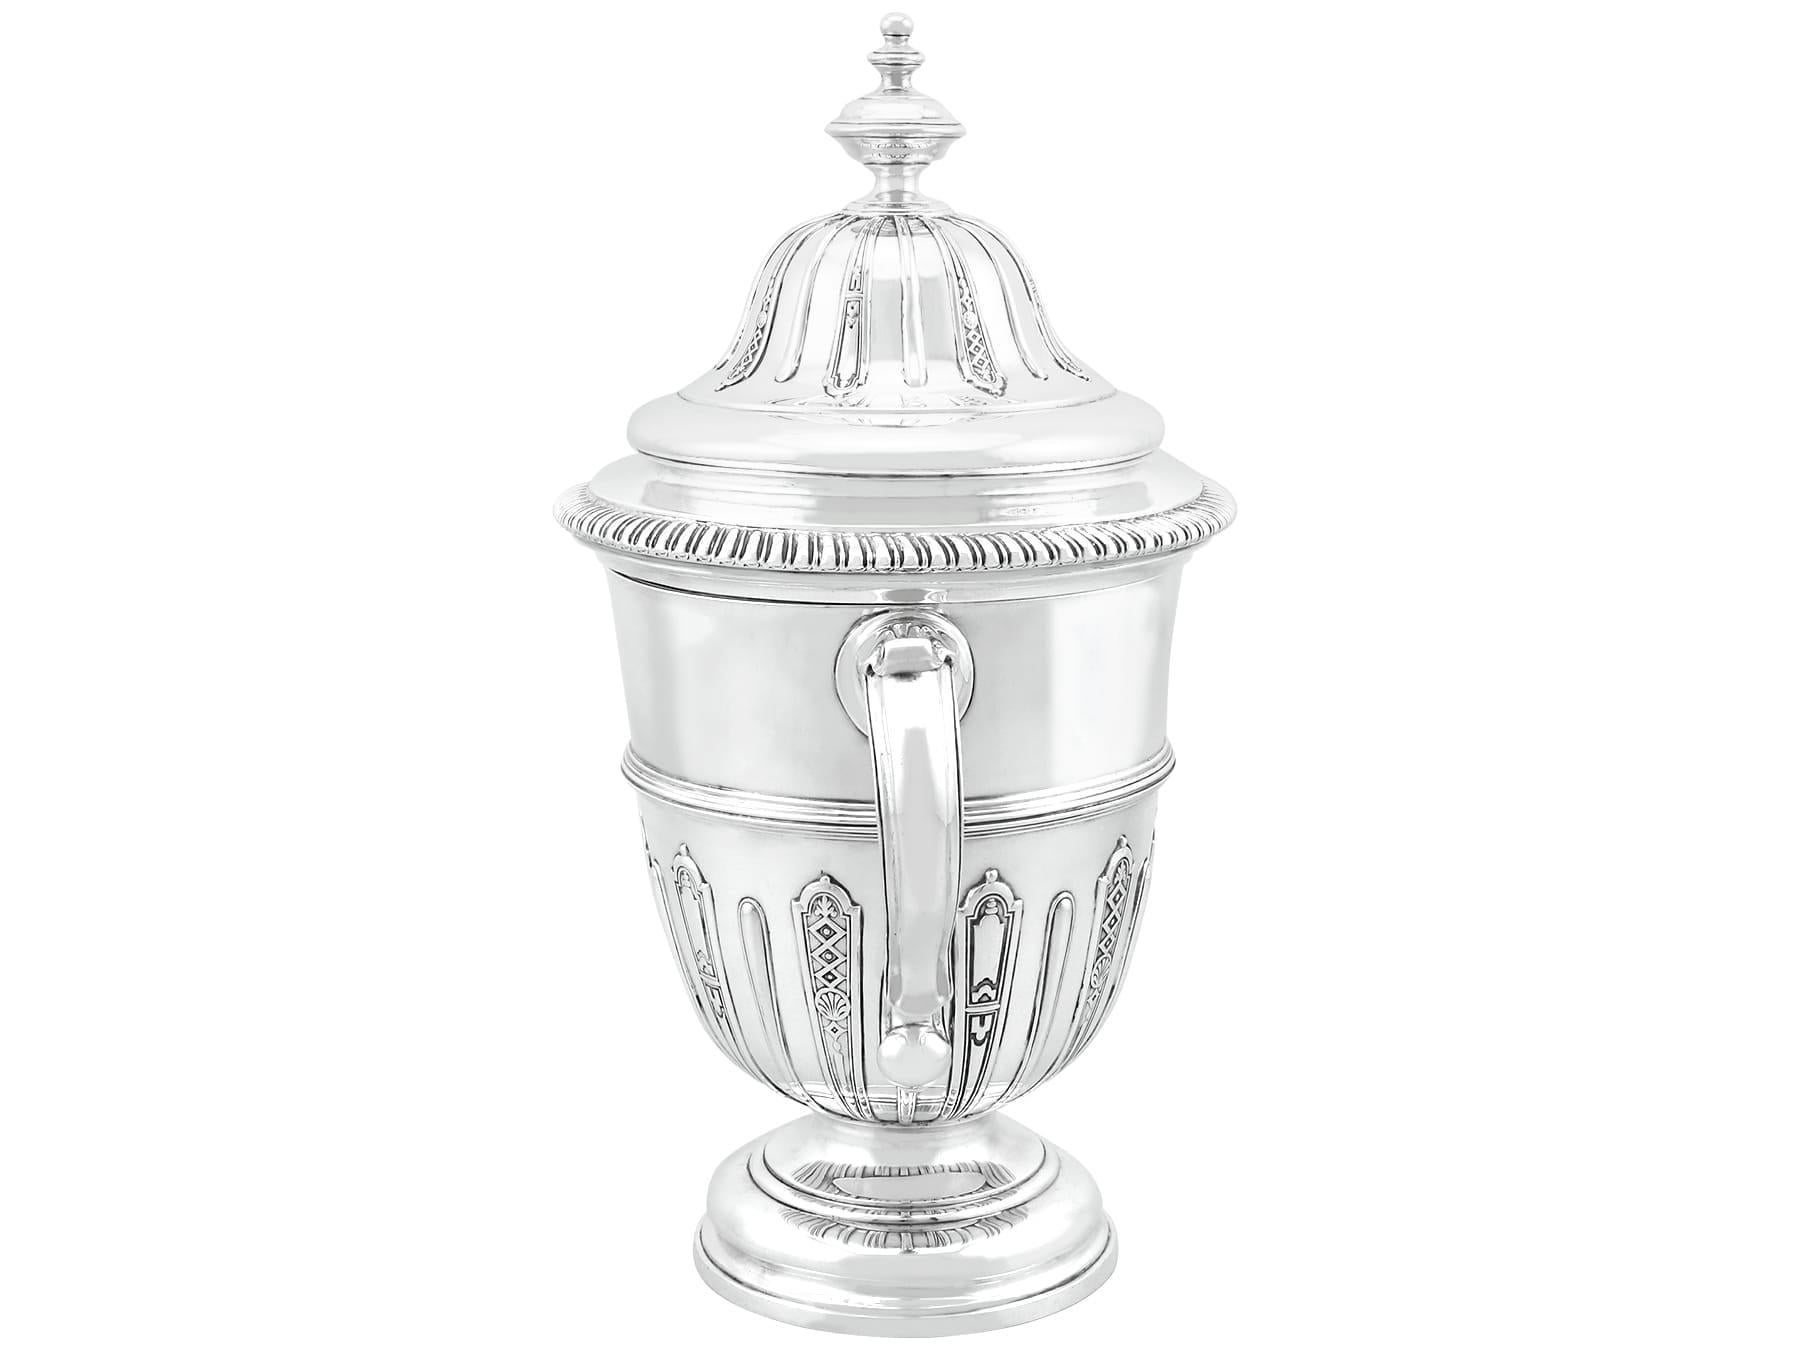 An exceptional, fine and impressive antique Victorian English sterling silver presentation cup and cover; an addition to our silver presentation collection

This exceptional antique Victorian sterling silver trophy cup has a plain bell shaped form